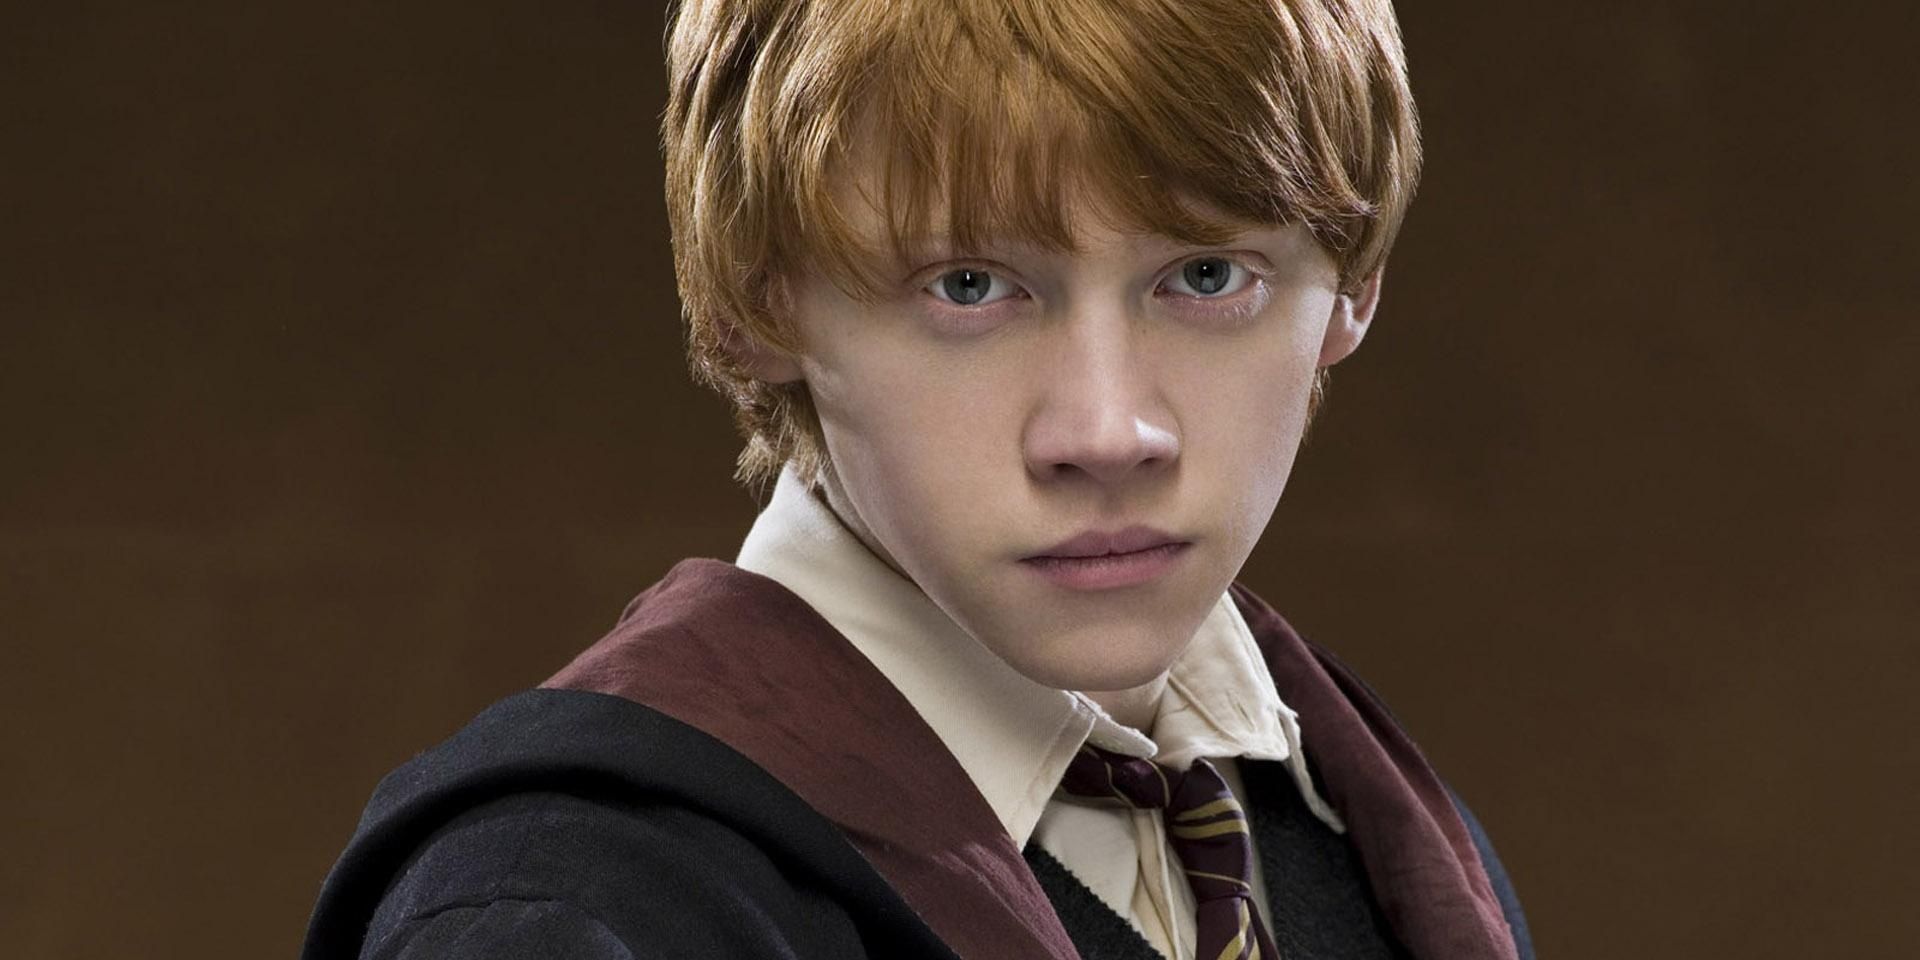 Rupert Grint as Ron Weasley in Harry Potter and the Order of the Phoenix